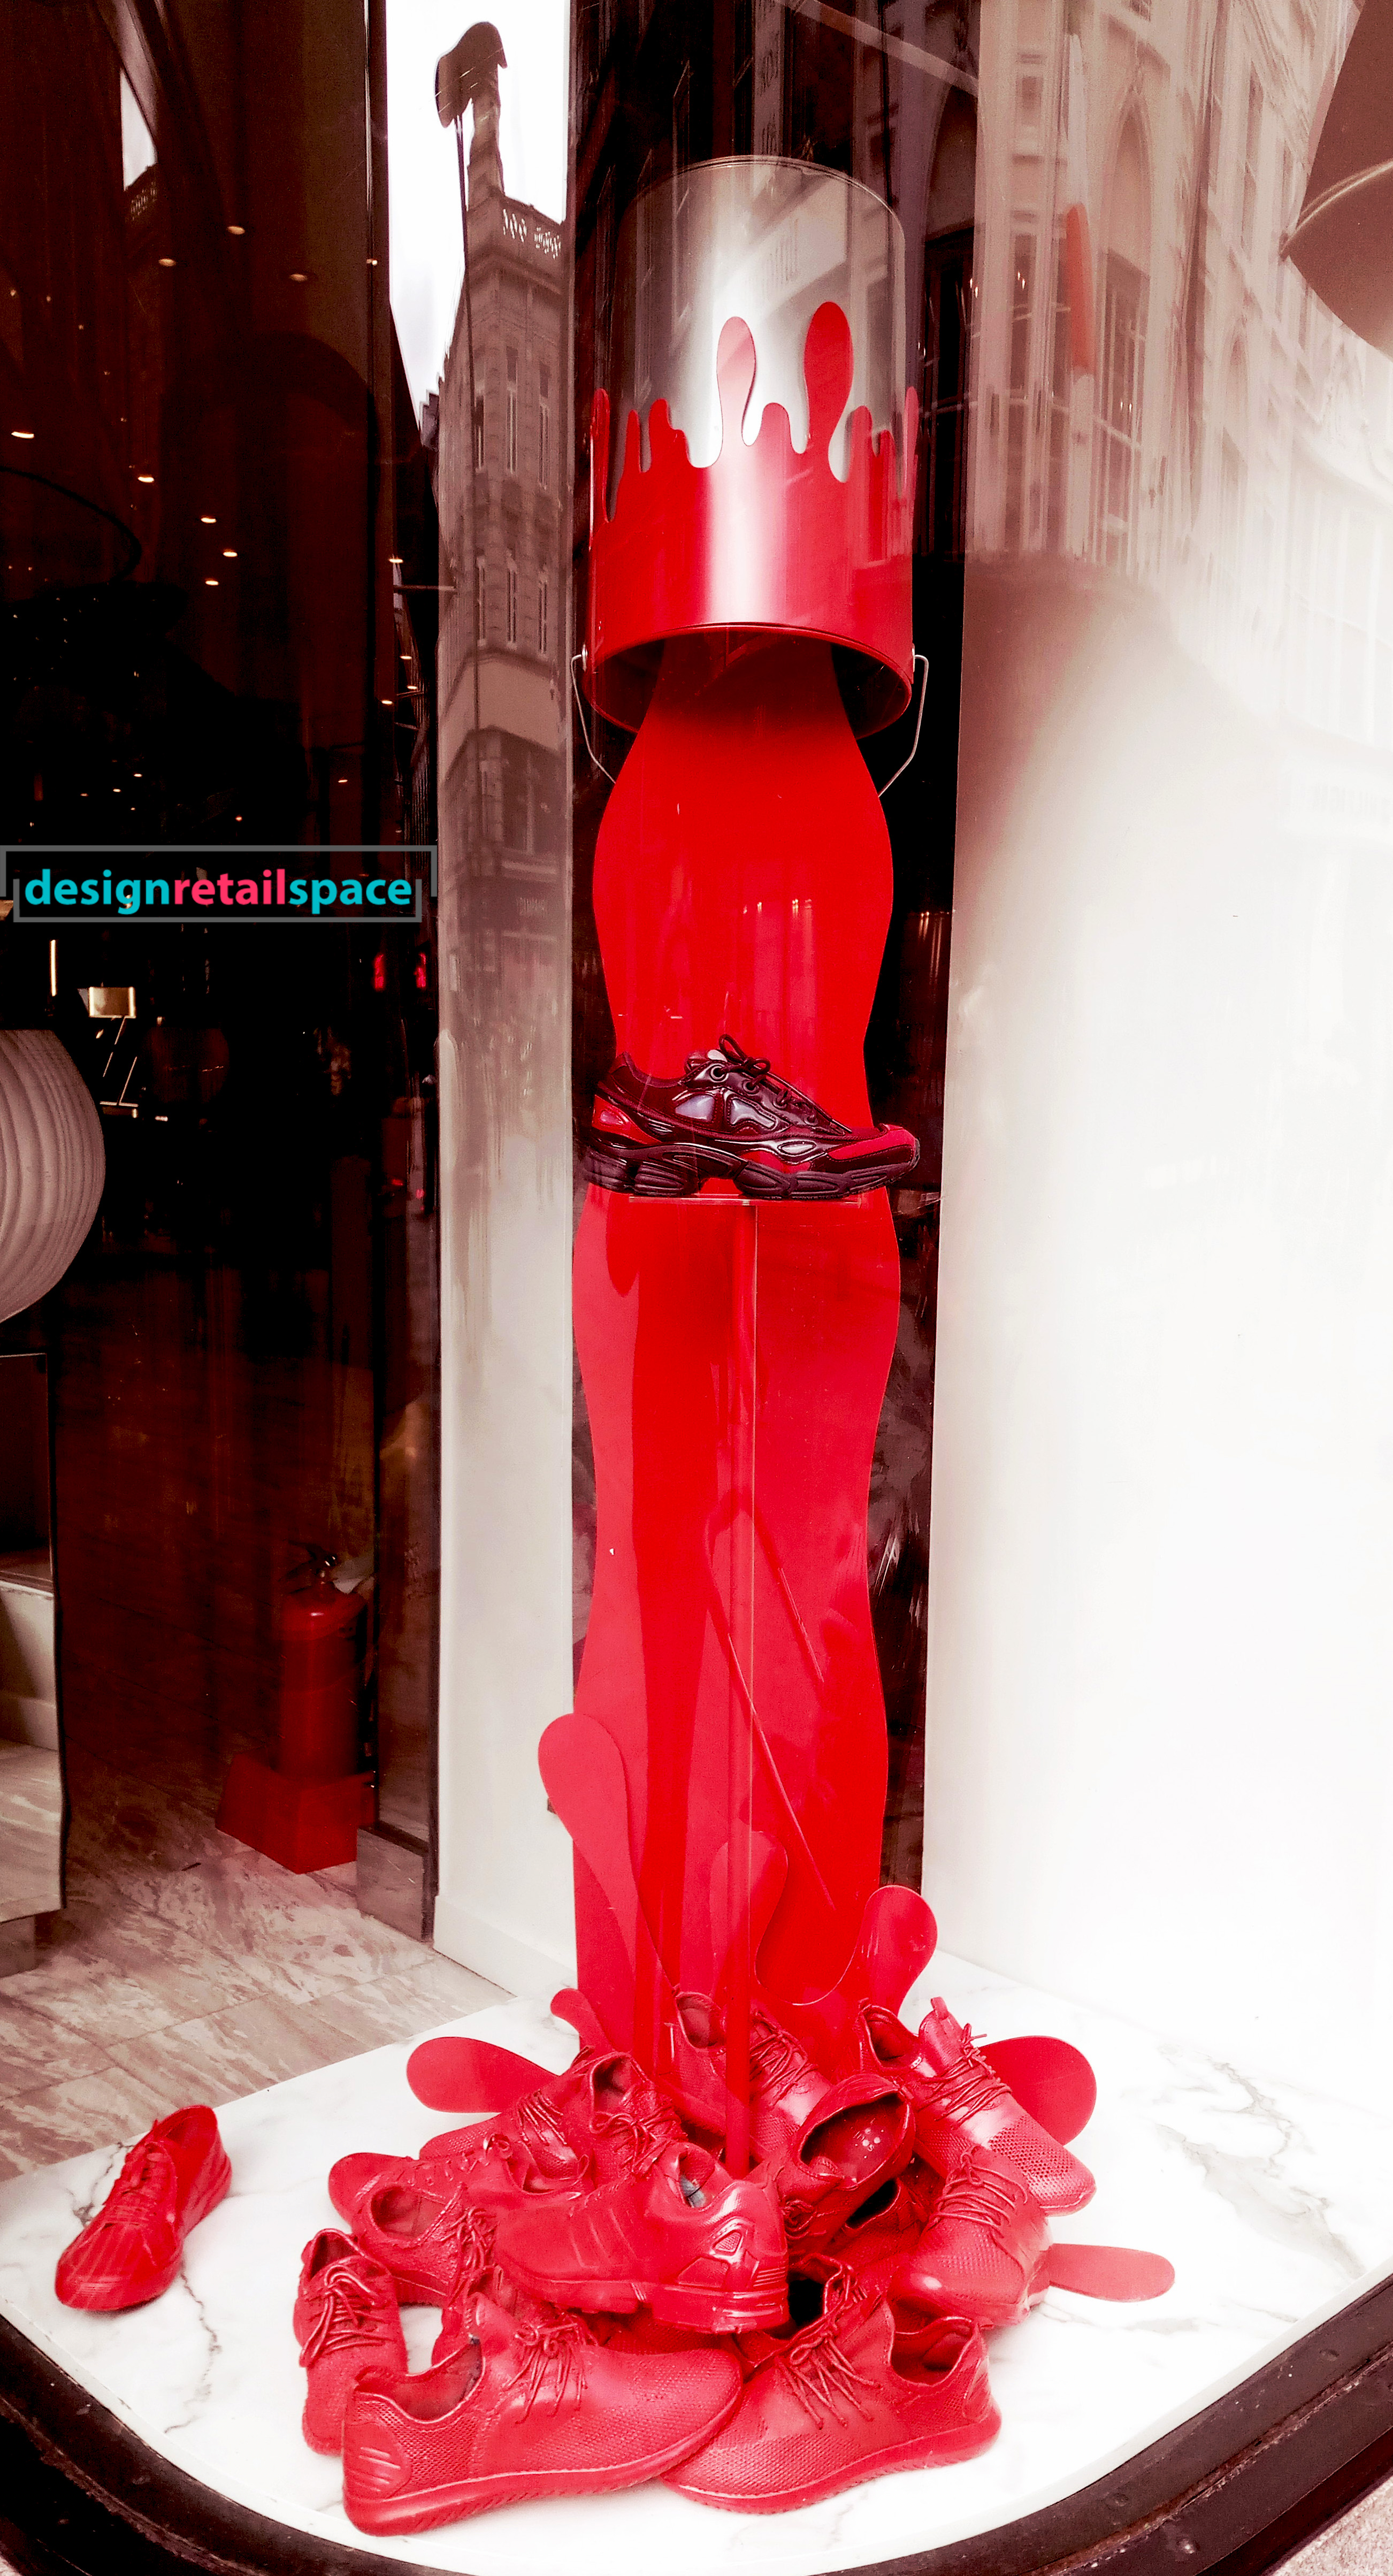 Brown Thomas Dublin window display showing bucket of red paint poured on shoes as representation of colour trends 2018